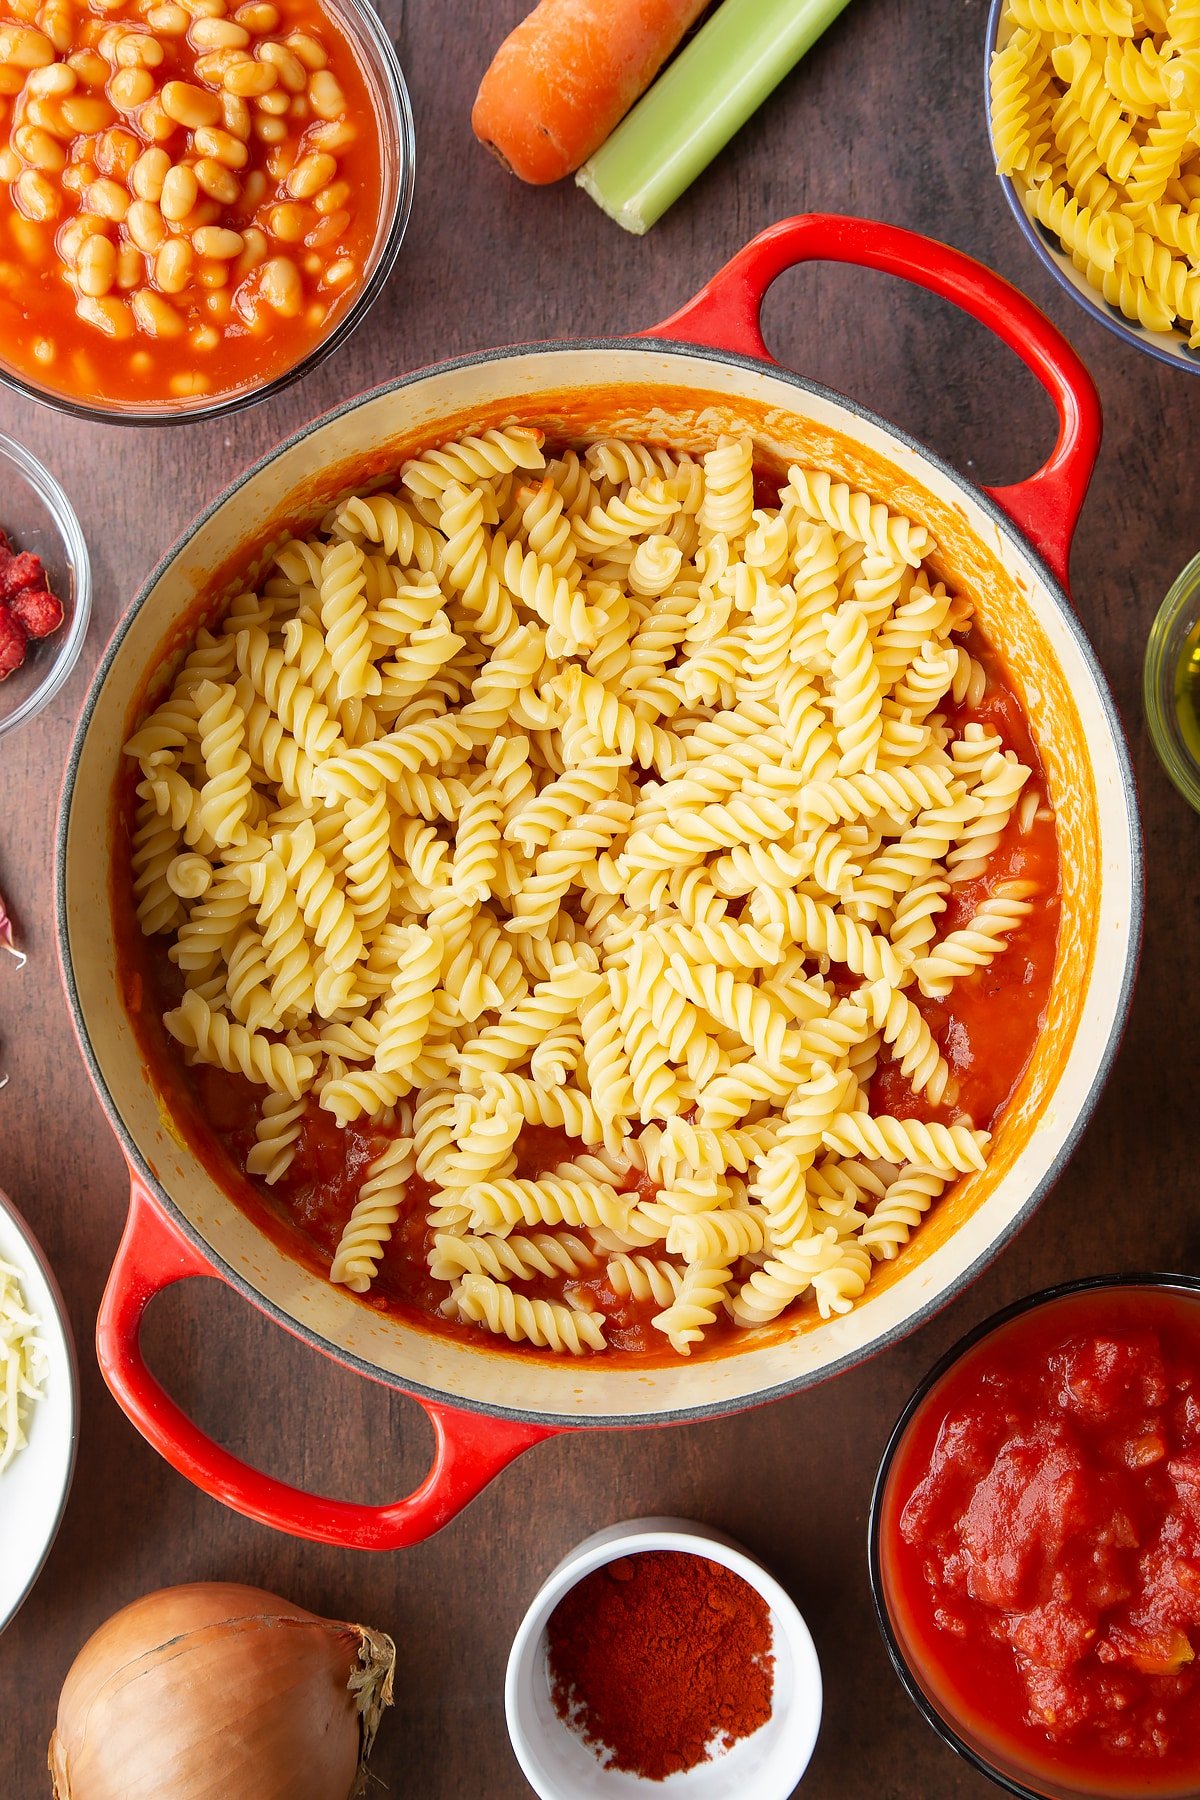 Grated veg, baked beans, tomatoes, tomato puree and paprika simmered down in a saucepan with pasta on top. Ingredients to make pasta and baked beans surround the pan.